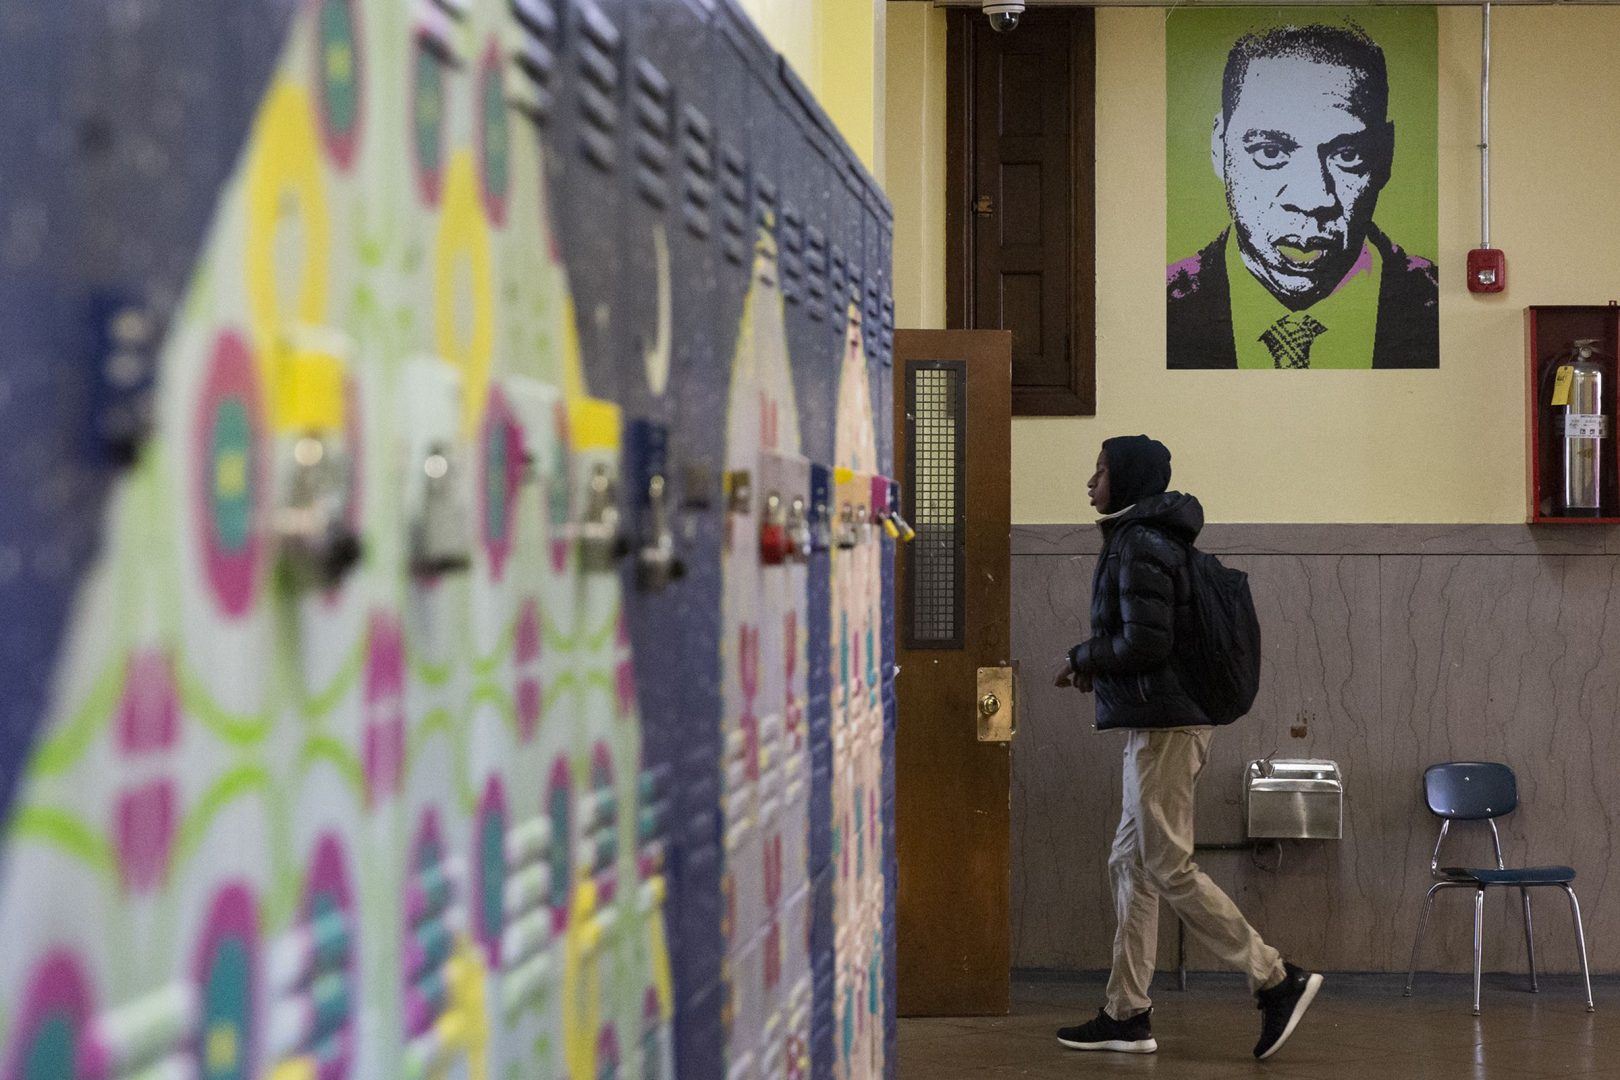 In this file photo, a student walks into a classroom at Jay Cooke Elementary in North Philadelphia. Philadelphia is among the school districts most shortchanged by the way Pennsylvania funds public education, according to a new analysis in a lawsuit challenging the system.